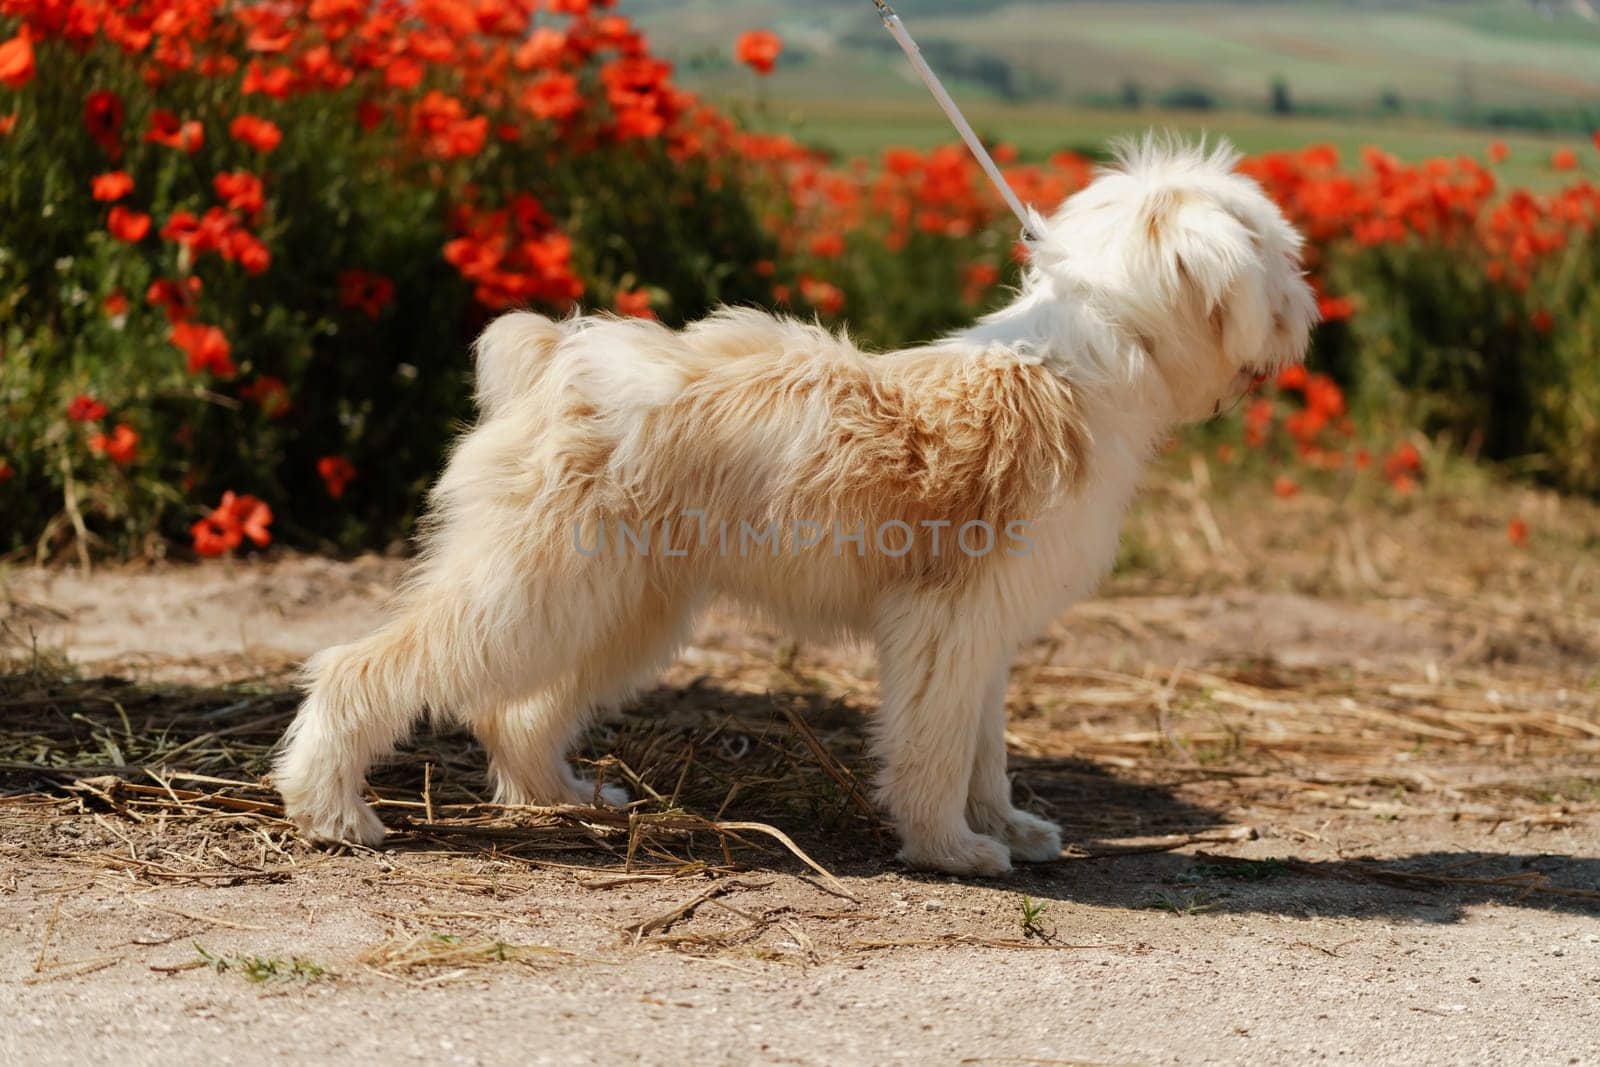 White dog puppy walks in a poppy field. Natural background with dog puppy sitting on a summer Sunny meadow surrounded by flowers